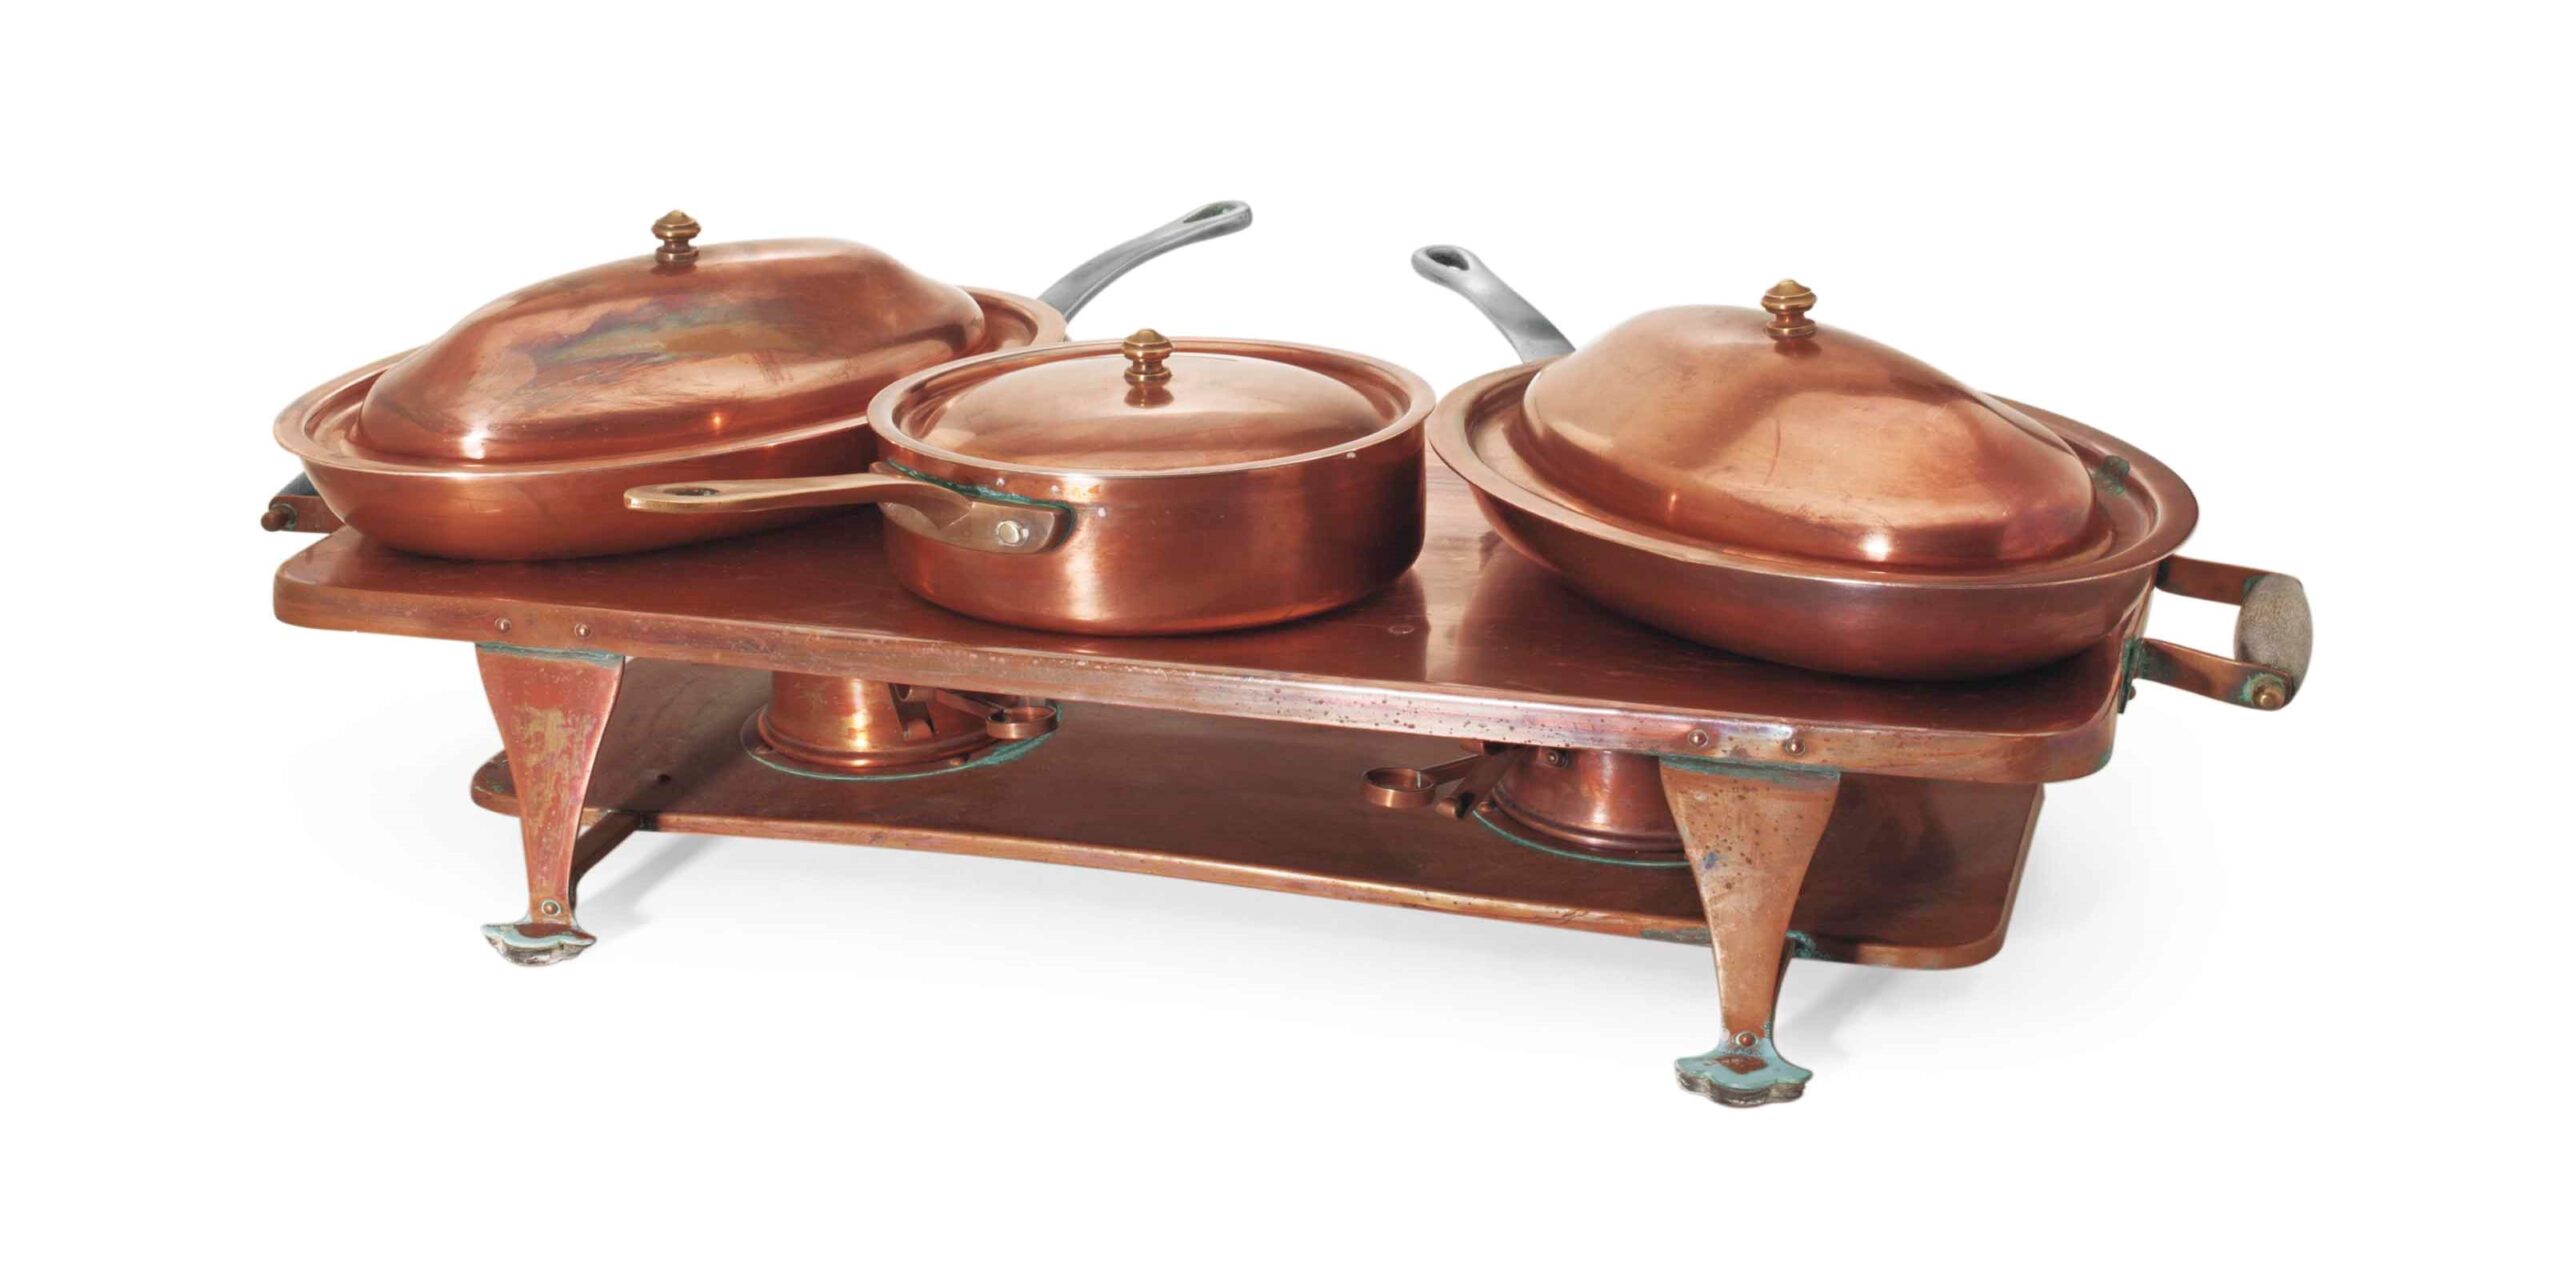 How To Buy The Best Copper Chafing Dish?